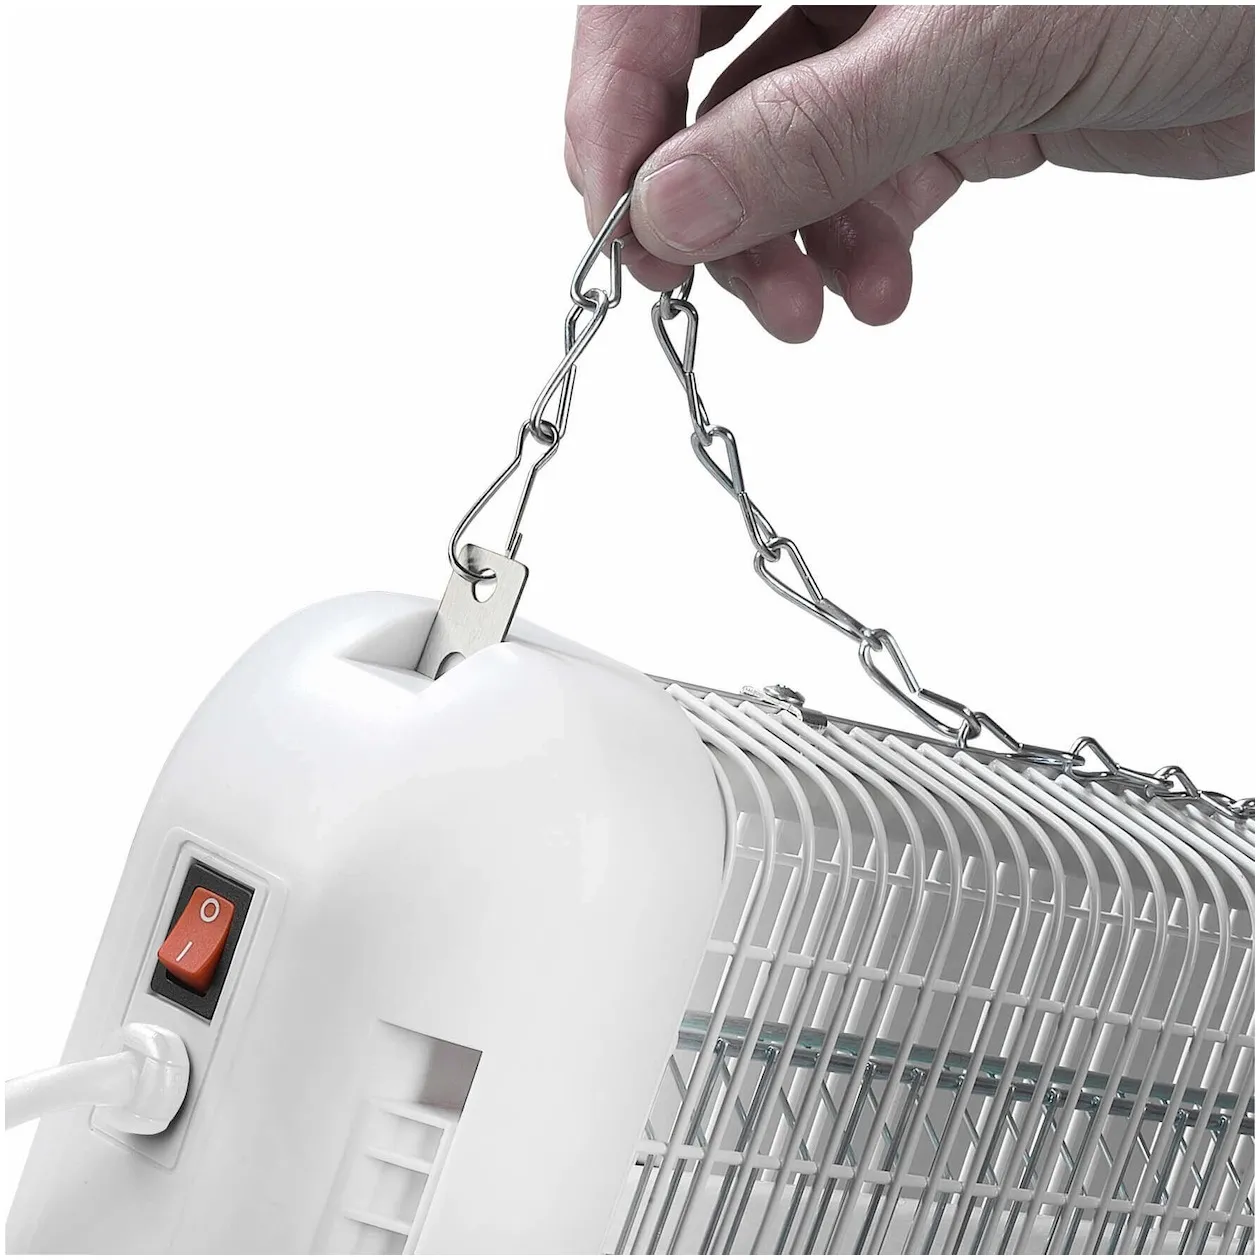 Eurom Fly Away All-round 30 Insect killer